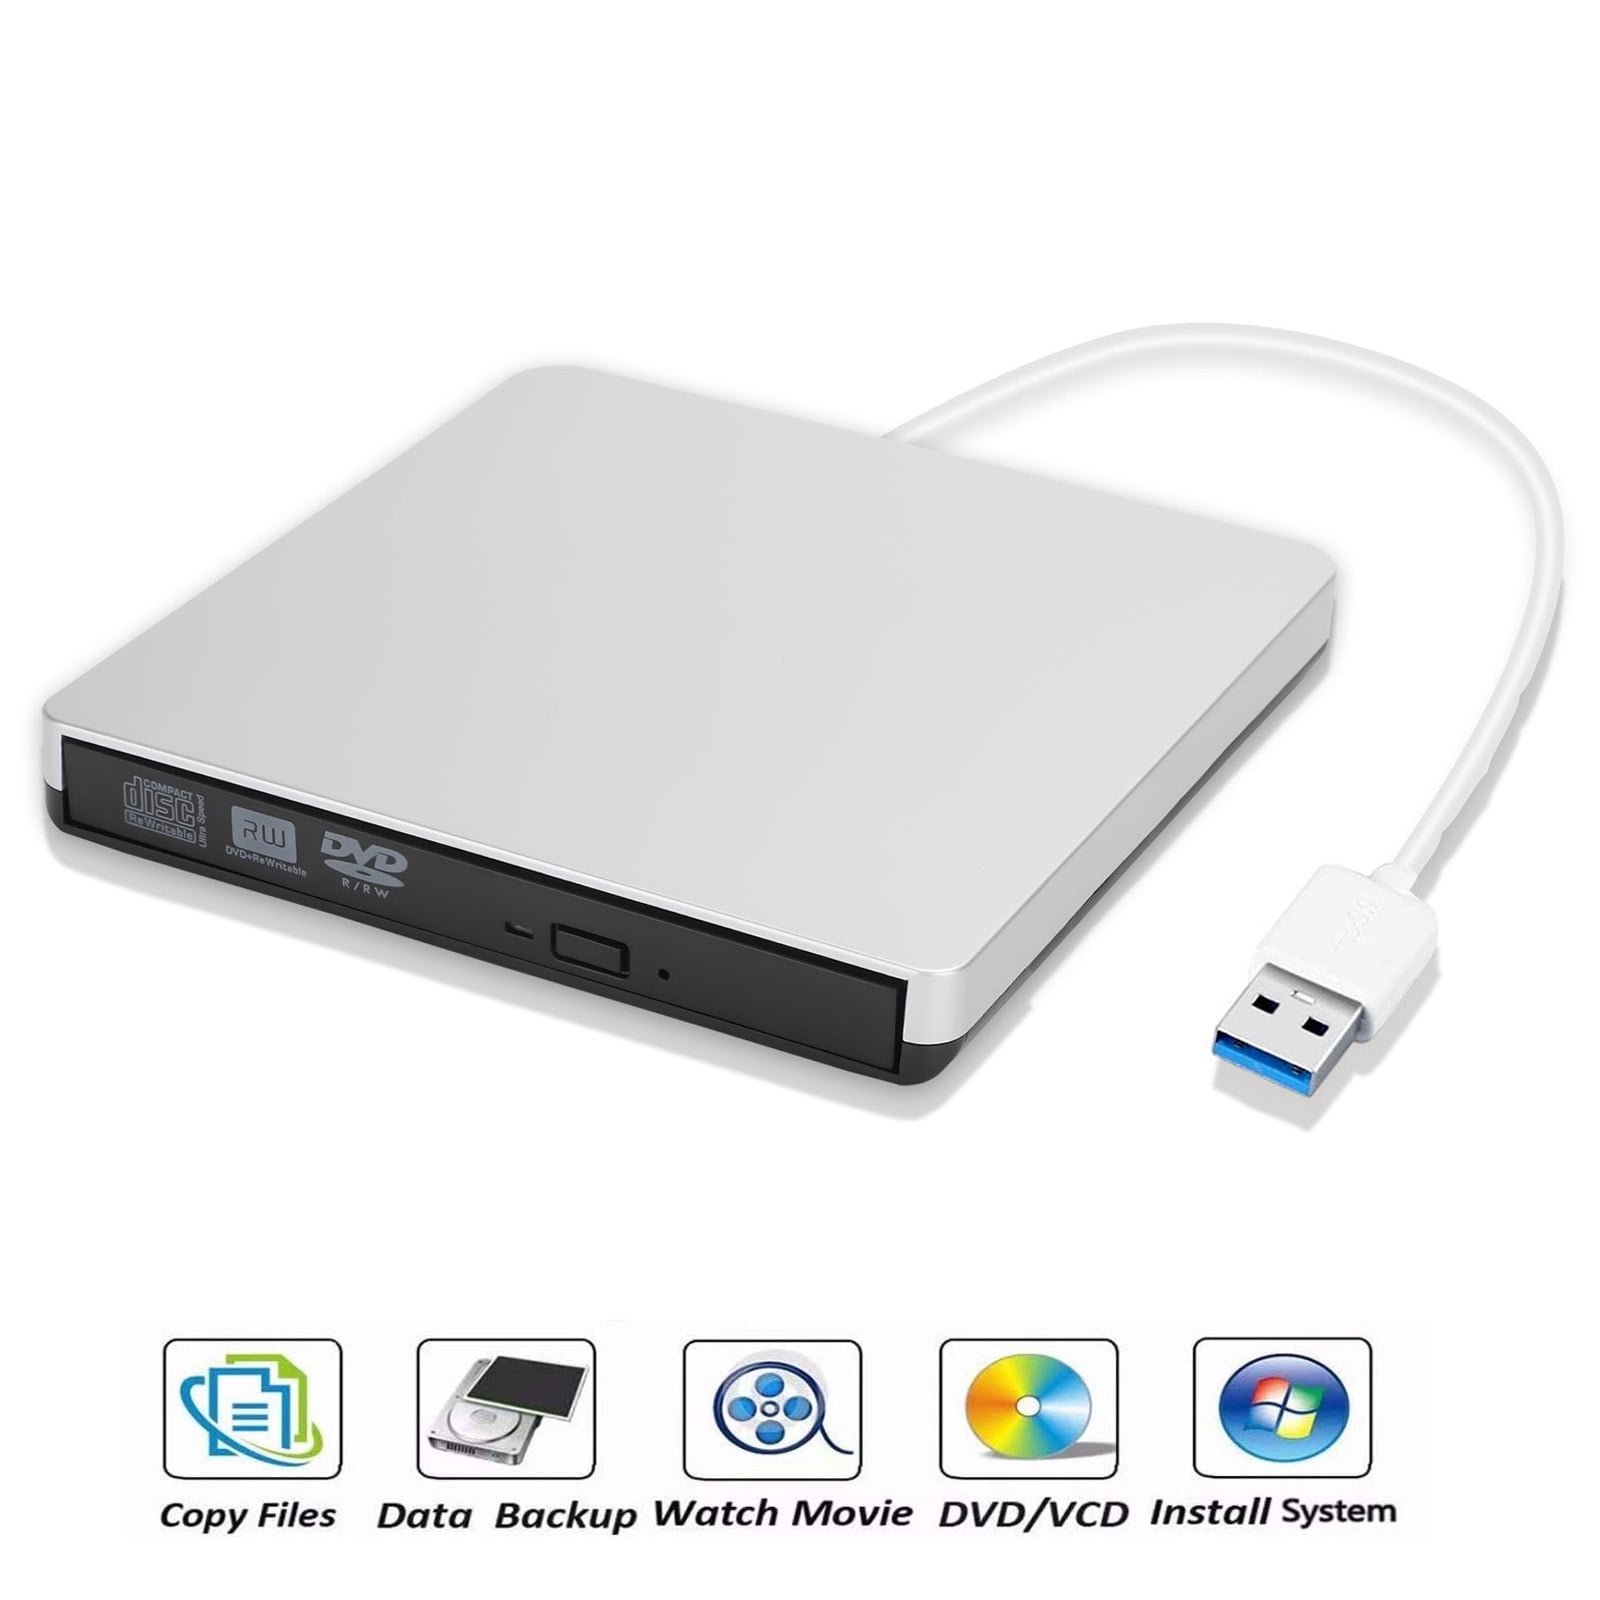 external region free dvd burner writer rom player drive for pc and mac computer